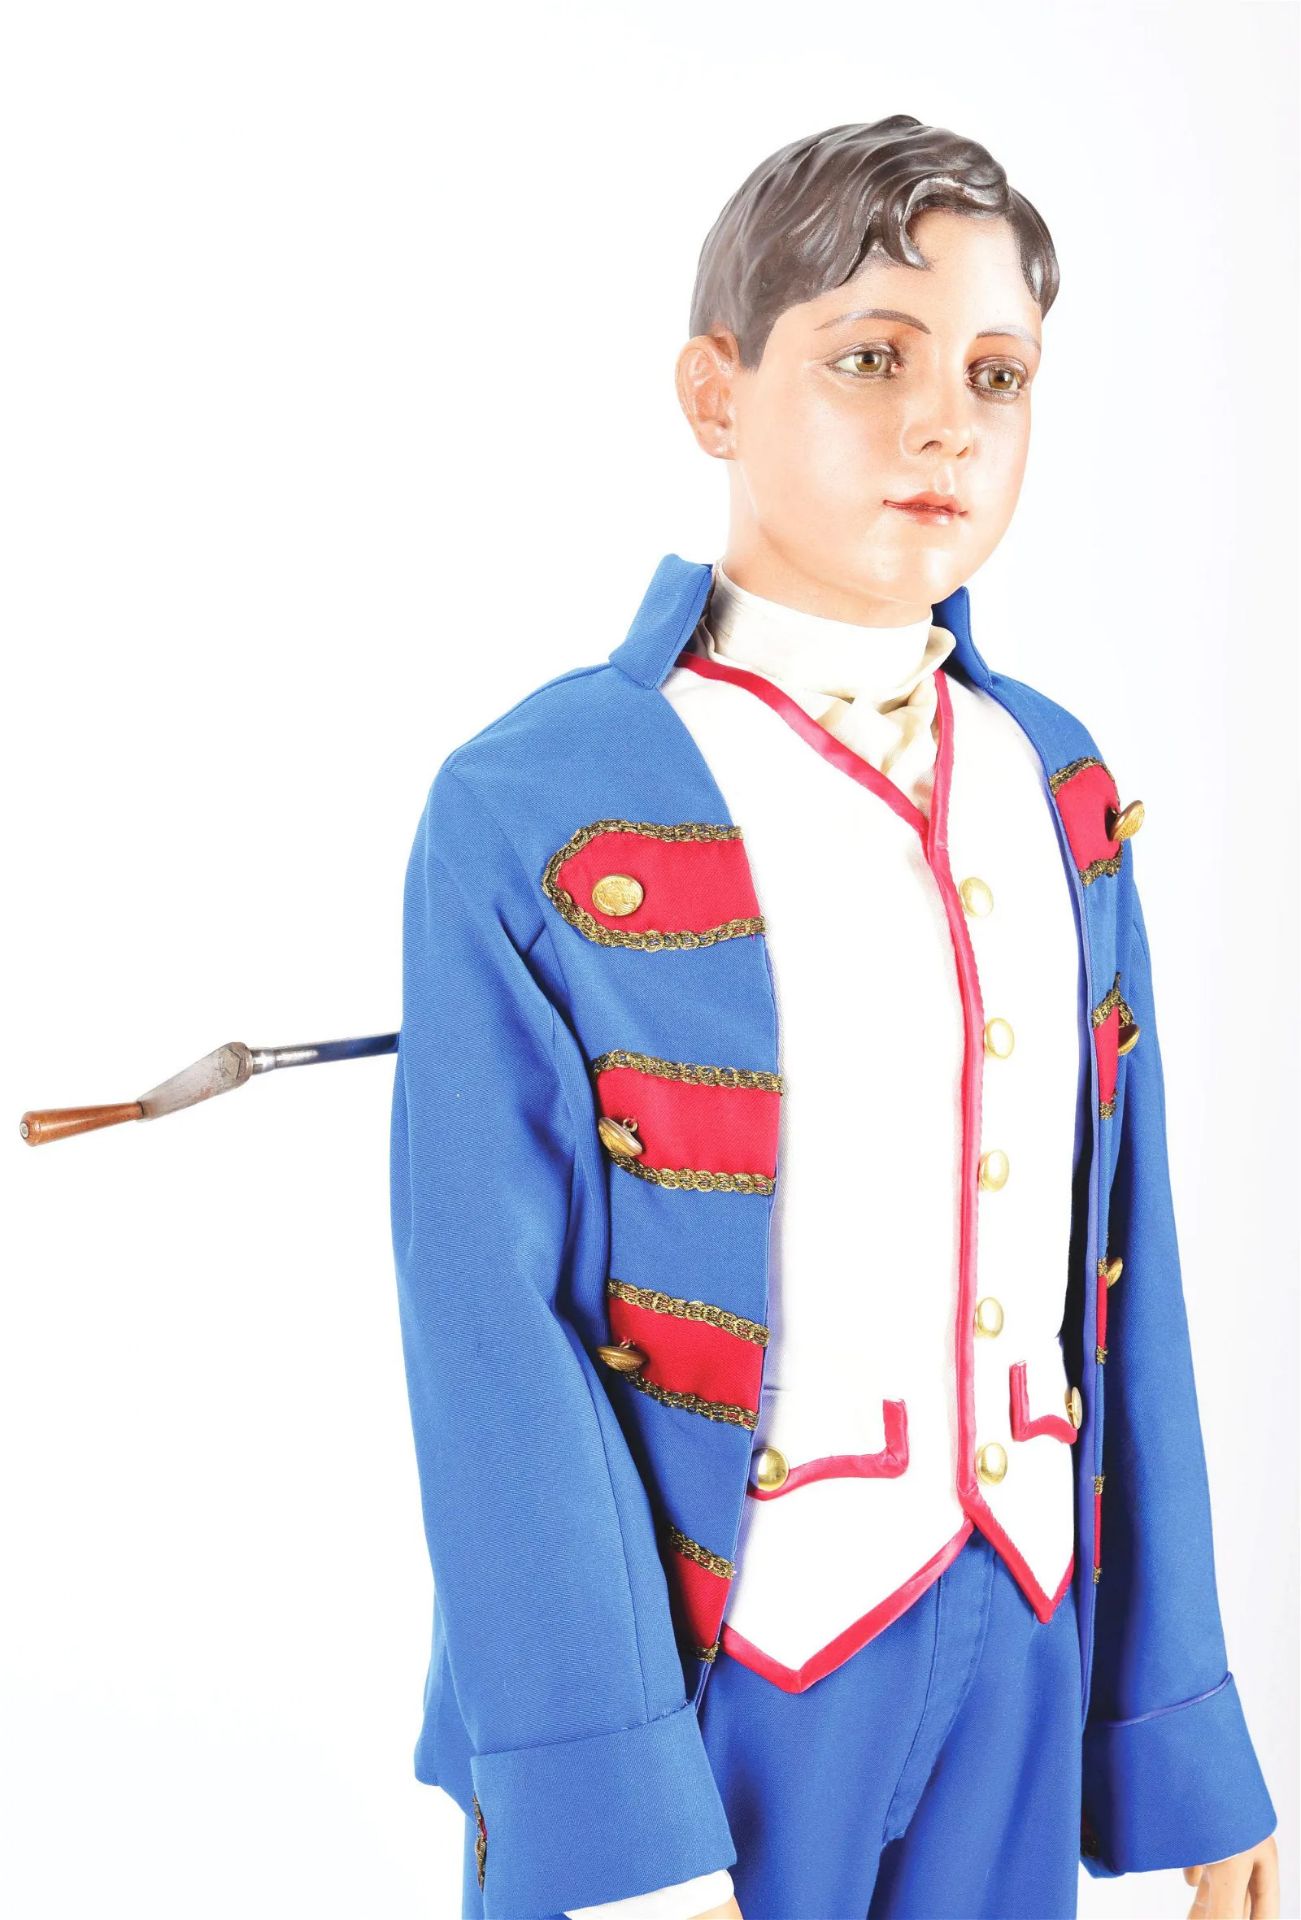 Life Size Young Boy Dressed In Majorette Or Band Costume - Bild 7 aus 8